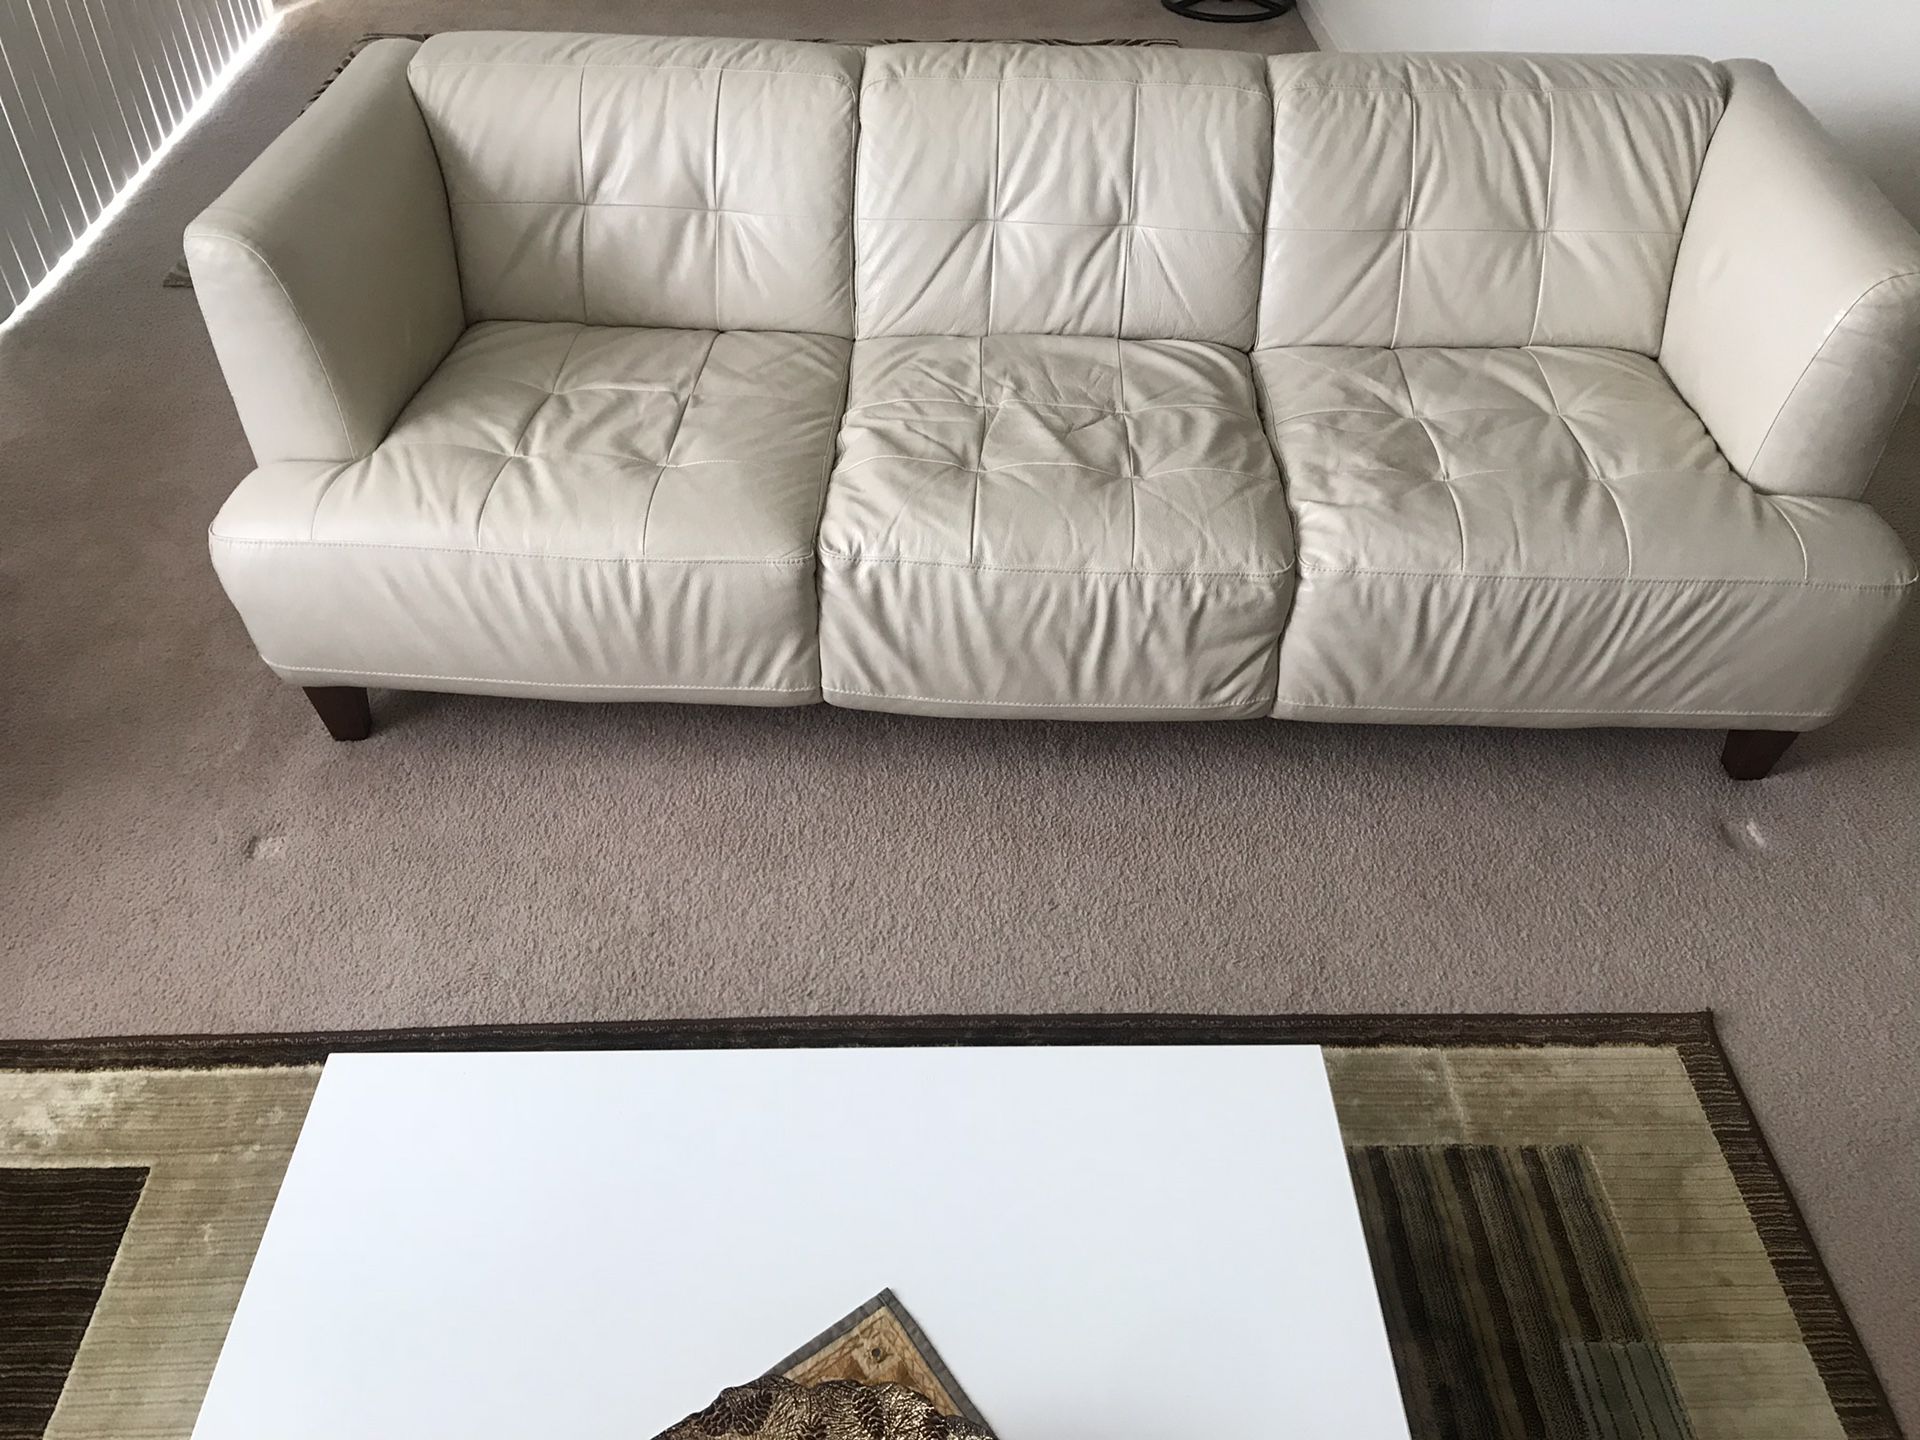 Cream leather sofa and arm chair